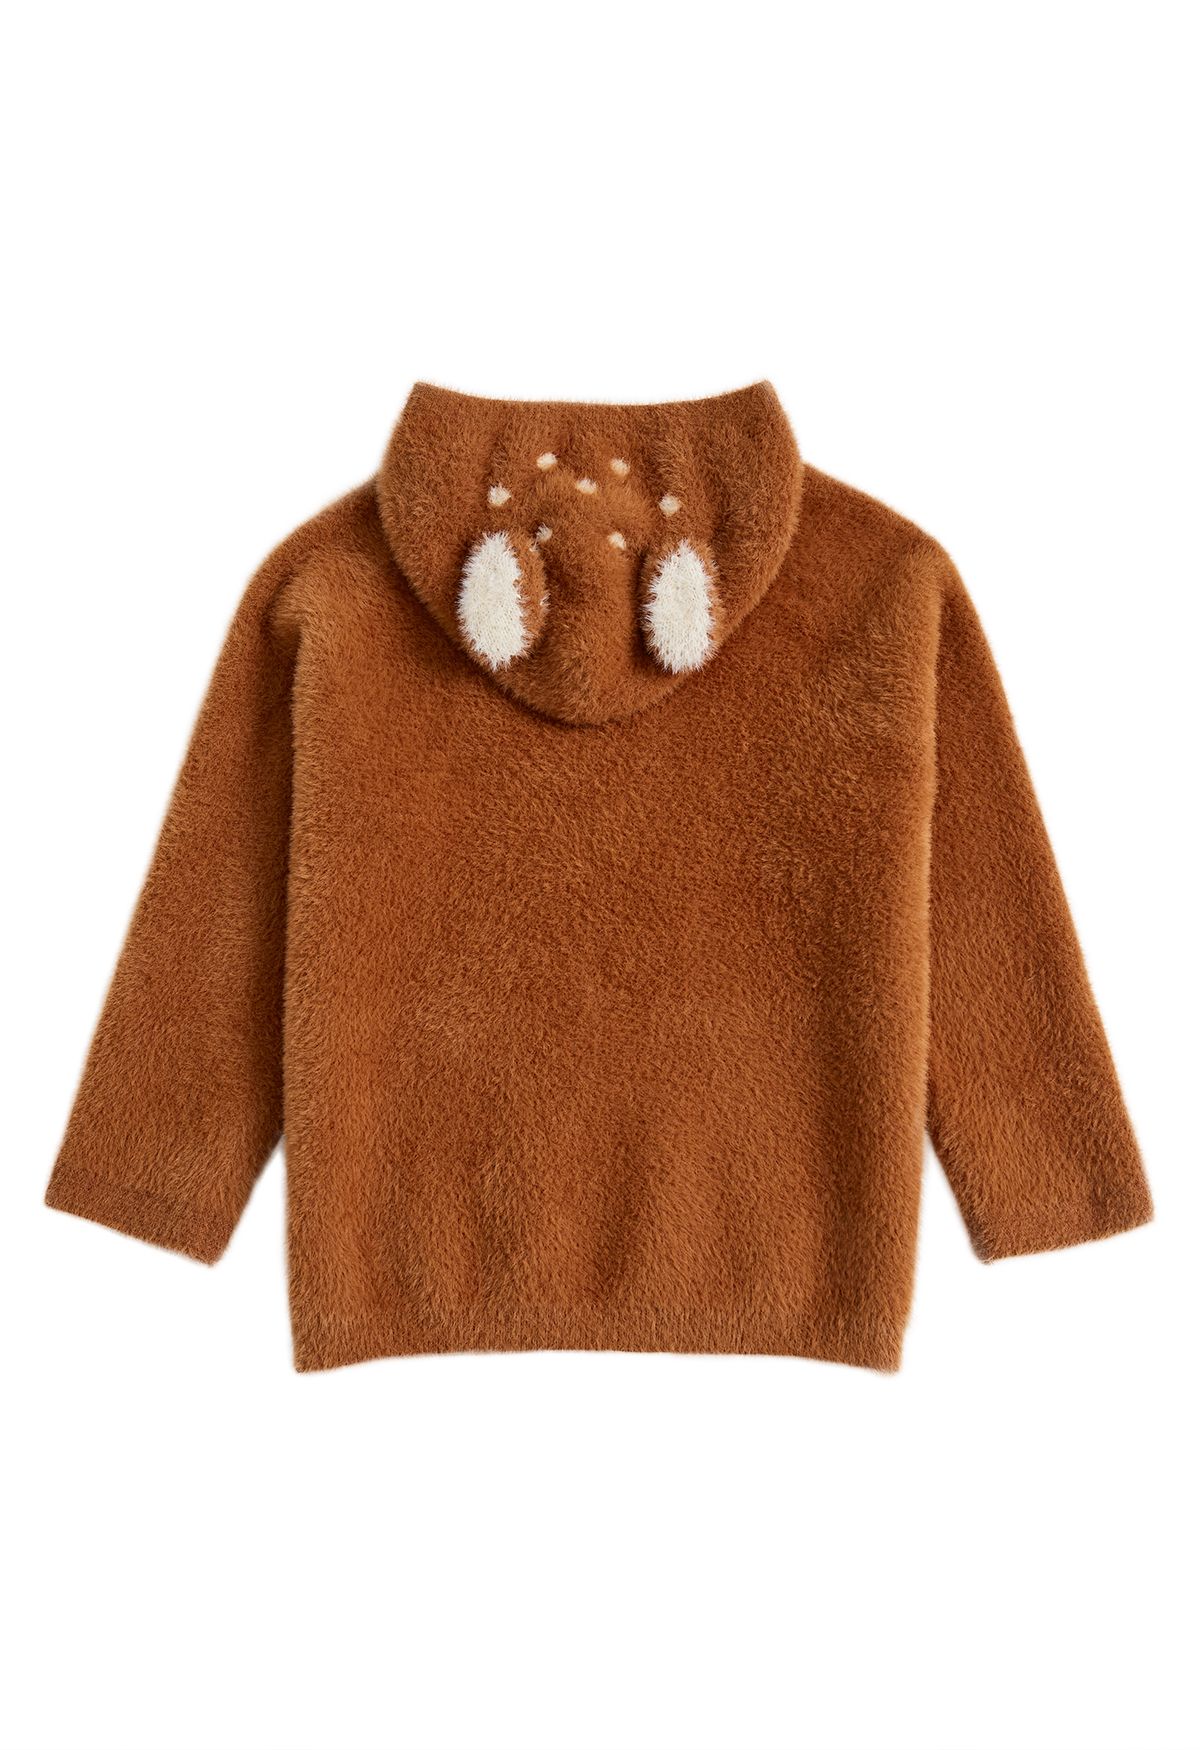 Sika Deer Fuzzy Knit Hooded Sweater in Caramel For Kids